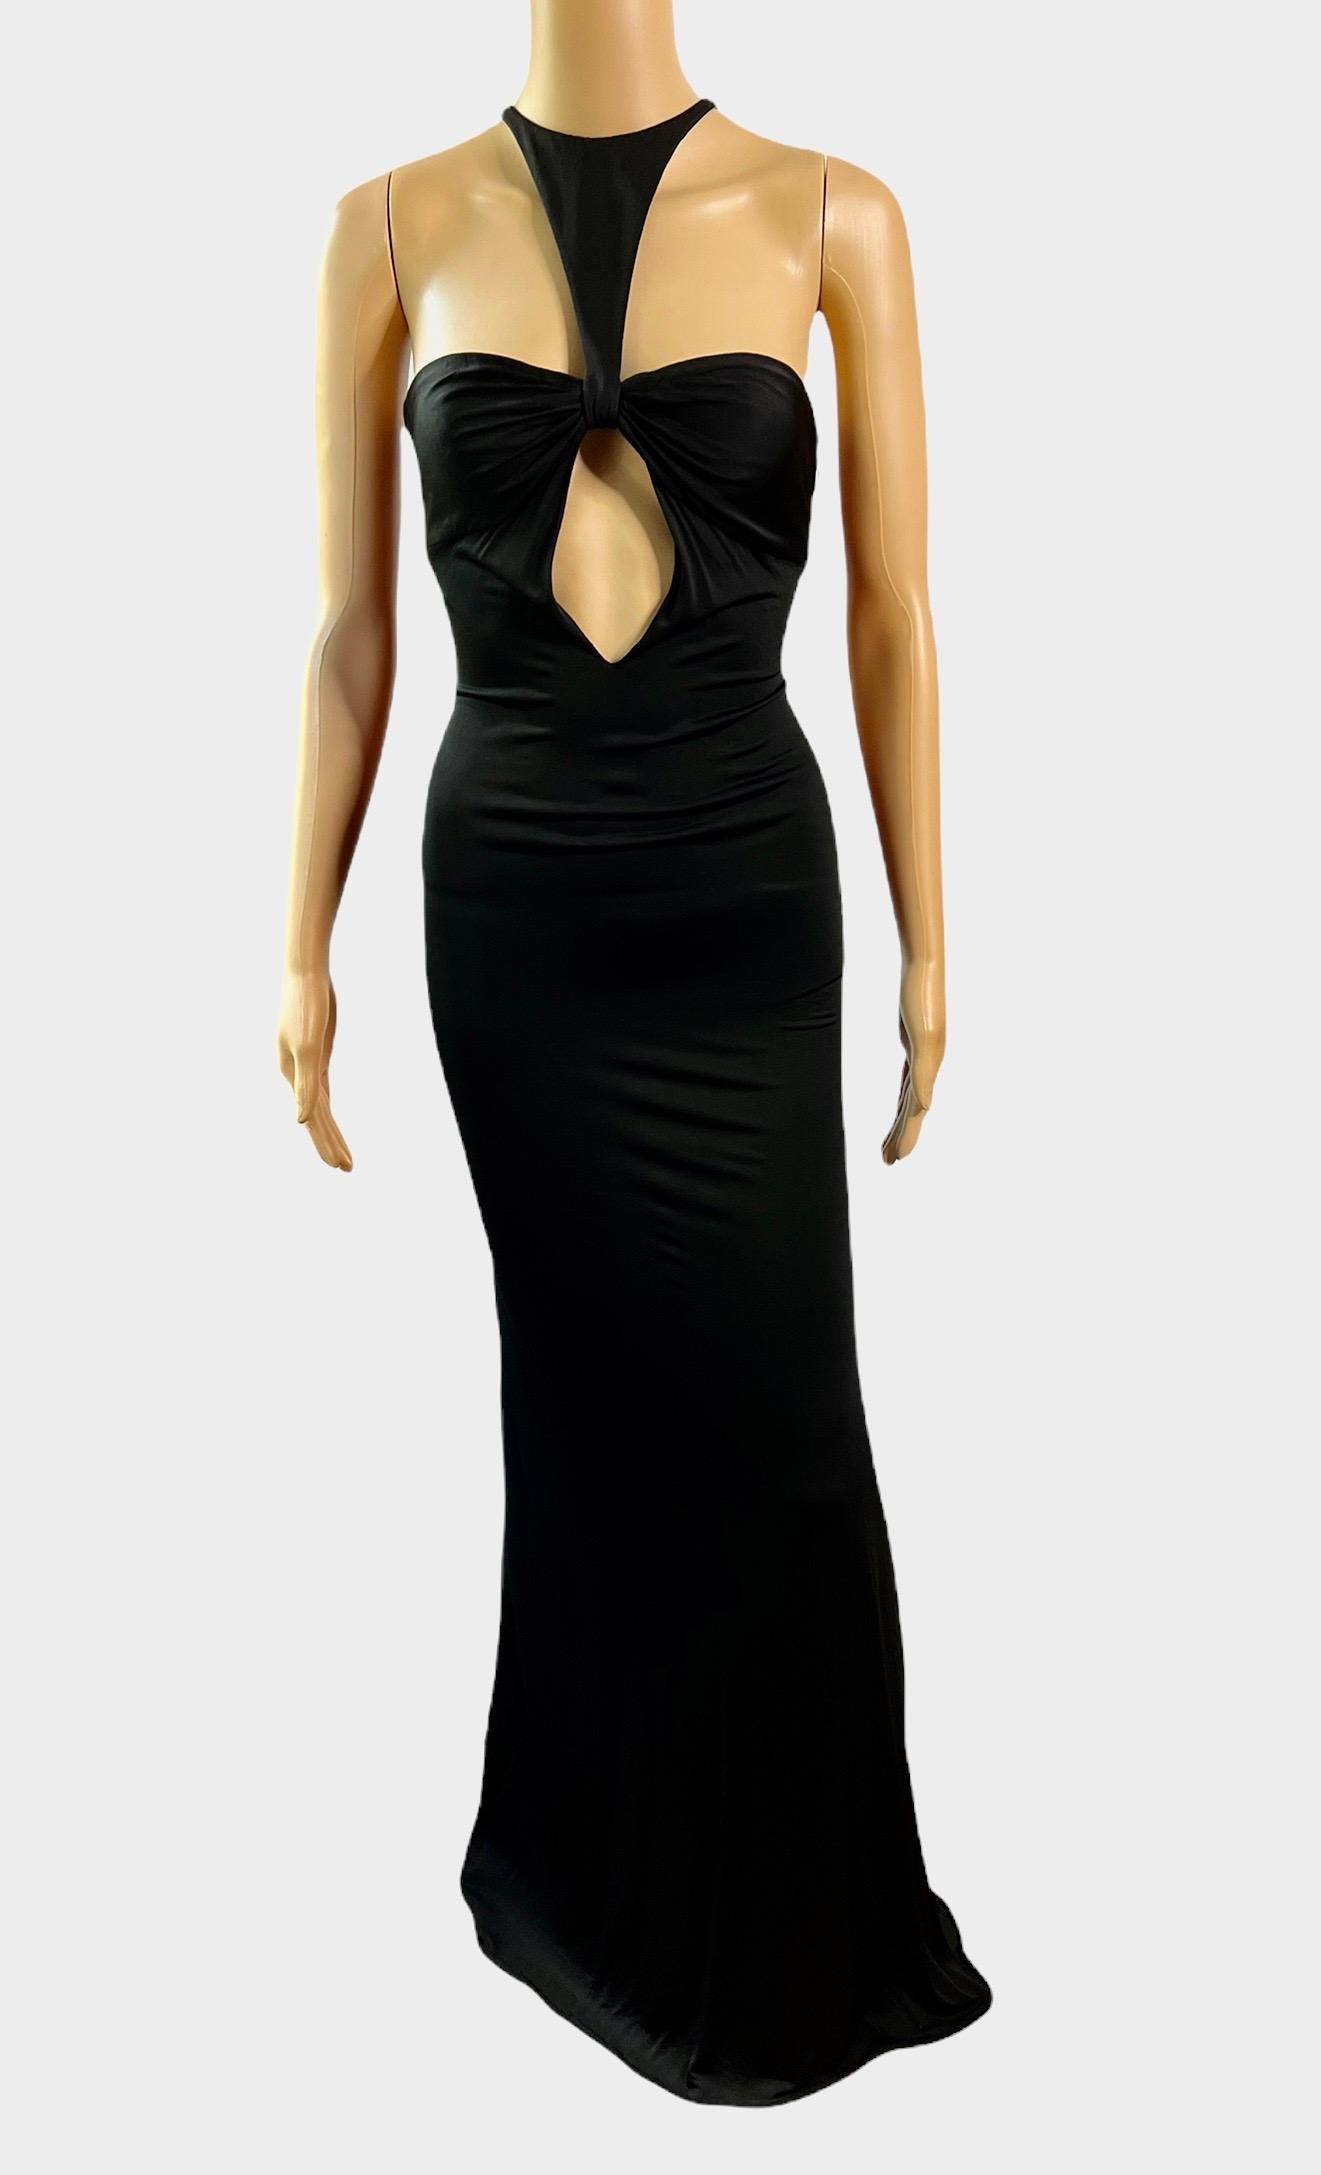 Tom Ford for Gucci F/W 2004 Plunging Cutout Black Evening Dress Gown In Good Condition In Naples, FL